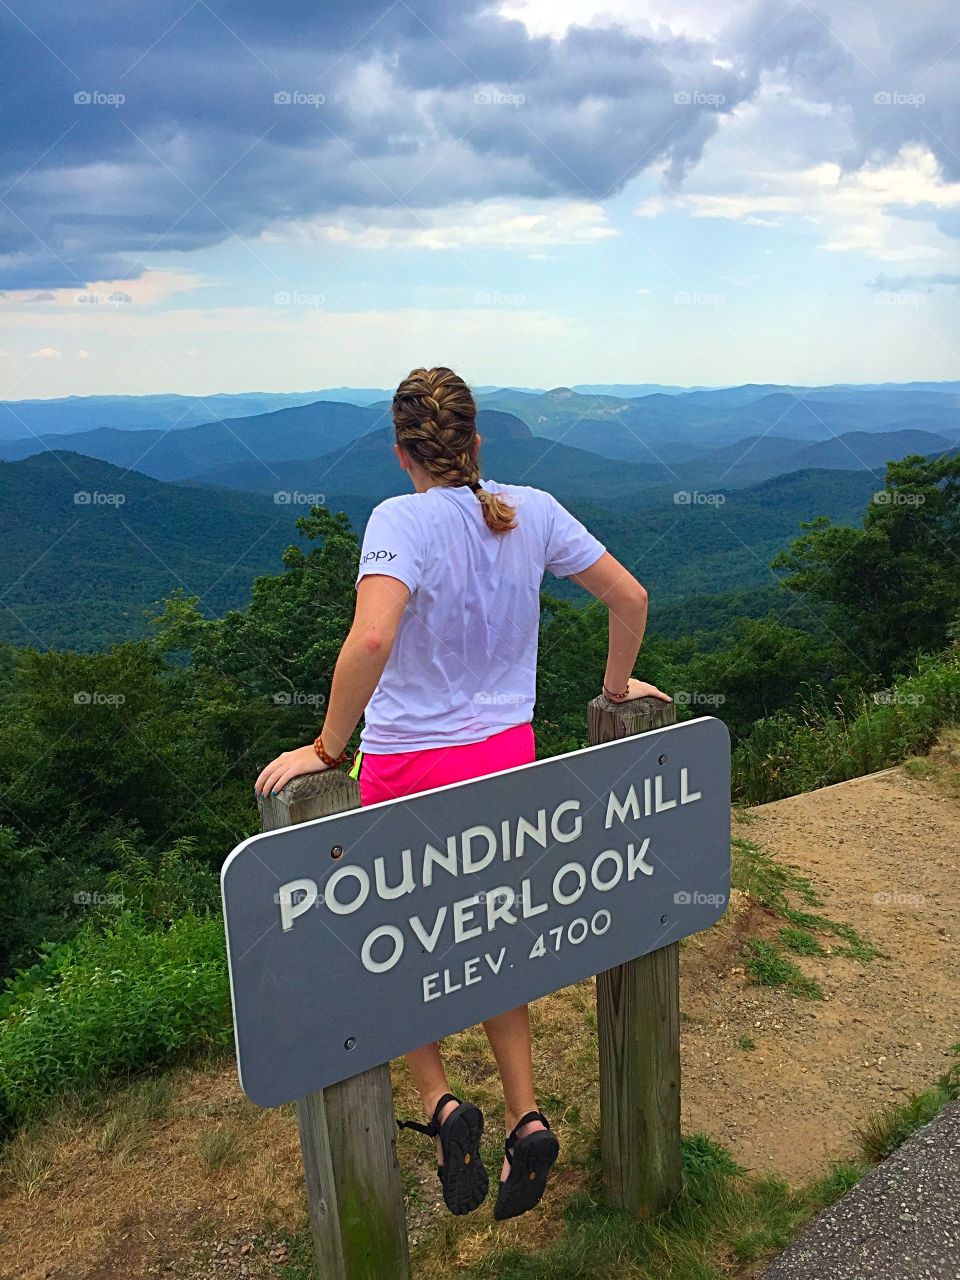 Pounding Mill Overlook. My very favorite overlook on the Blue Ridge Parkway. Go sometime, it's worth it. 